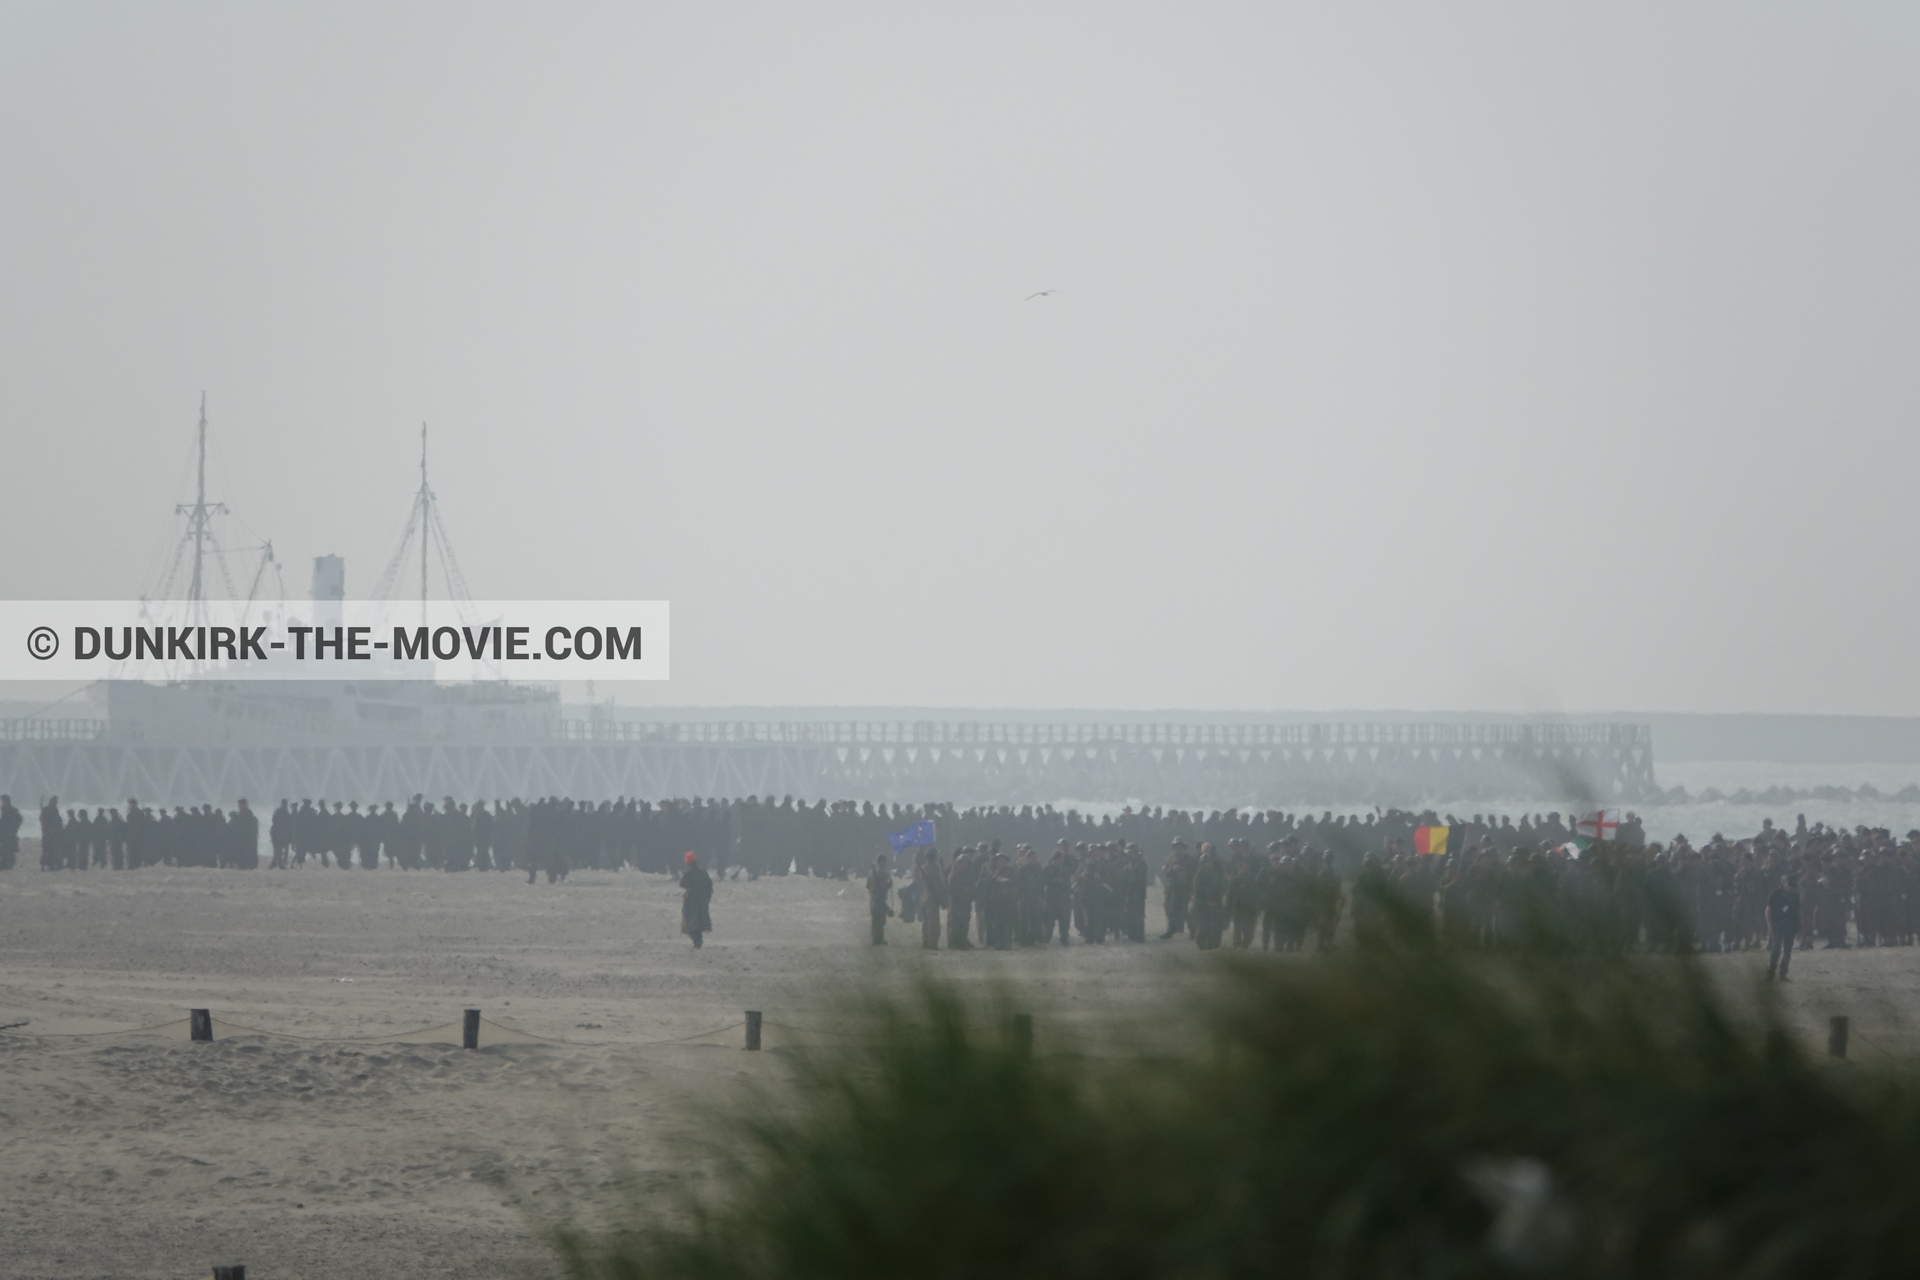 Picture with boat, supernumeraries, beach,  from behind the scene of the Dunkirk movie by Nolan